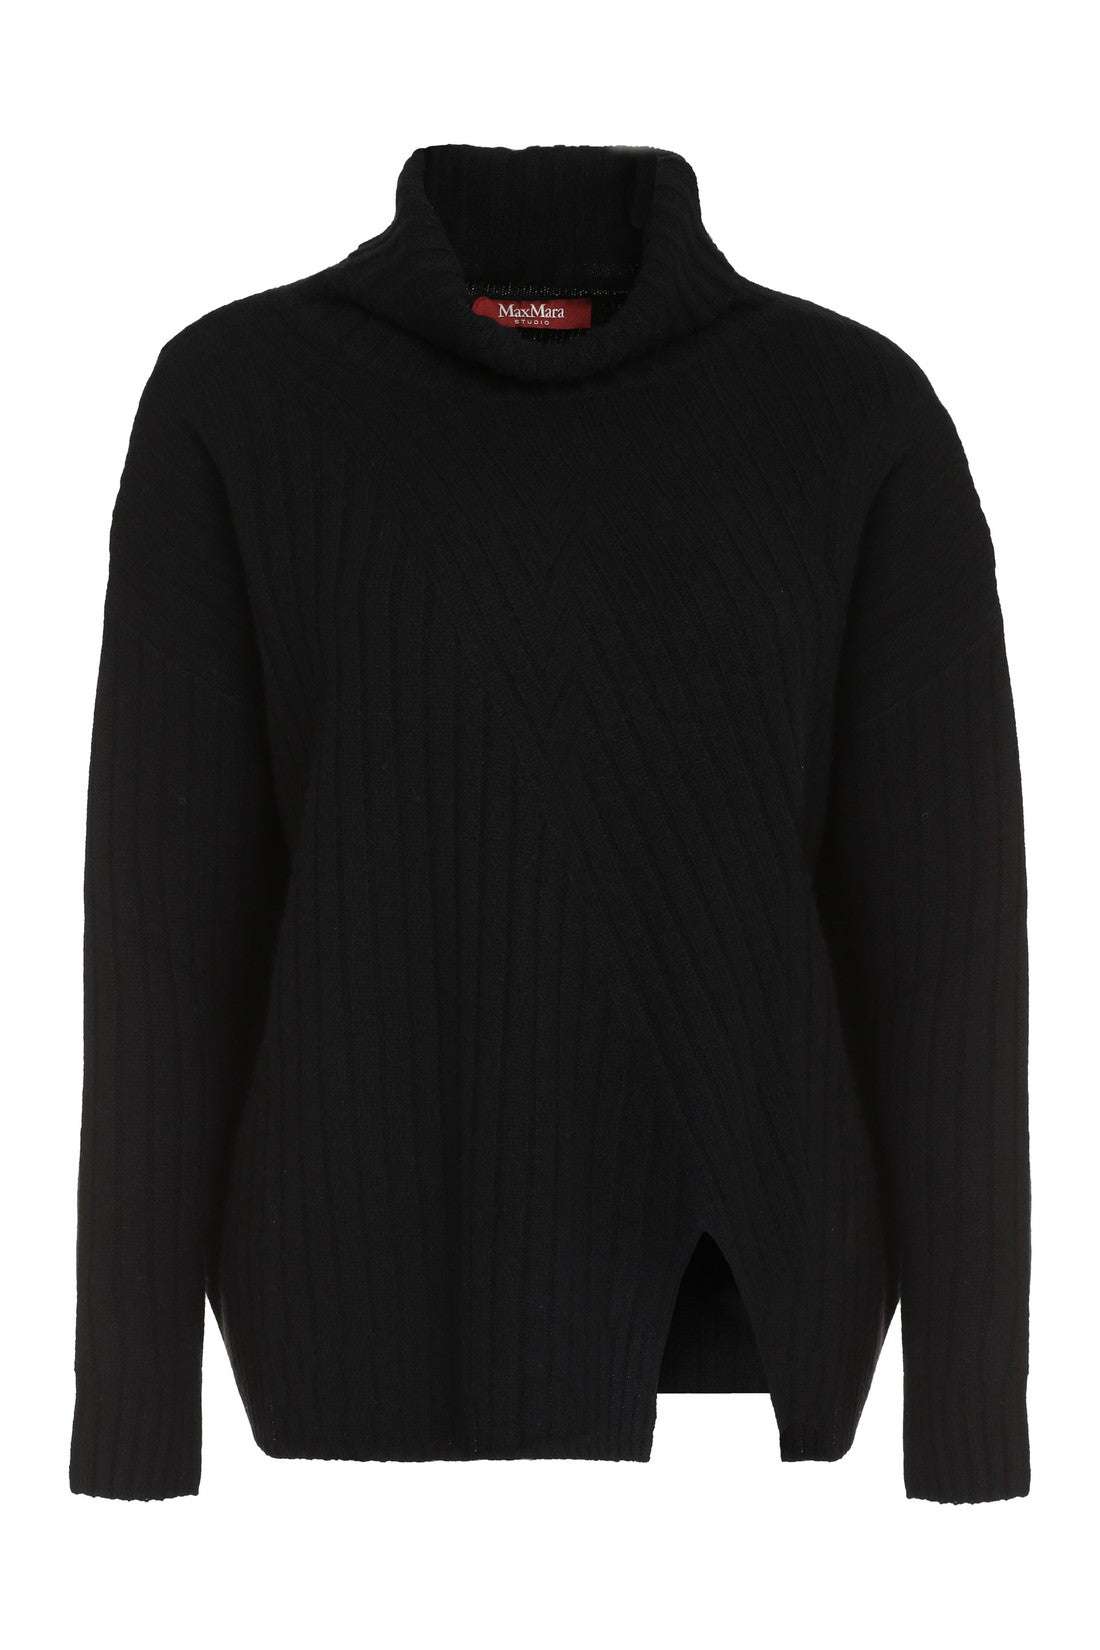 Max Mara Studio-OUTLET-SALE-Abile wool and cashmere sweater-ARCHIVIST